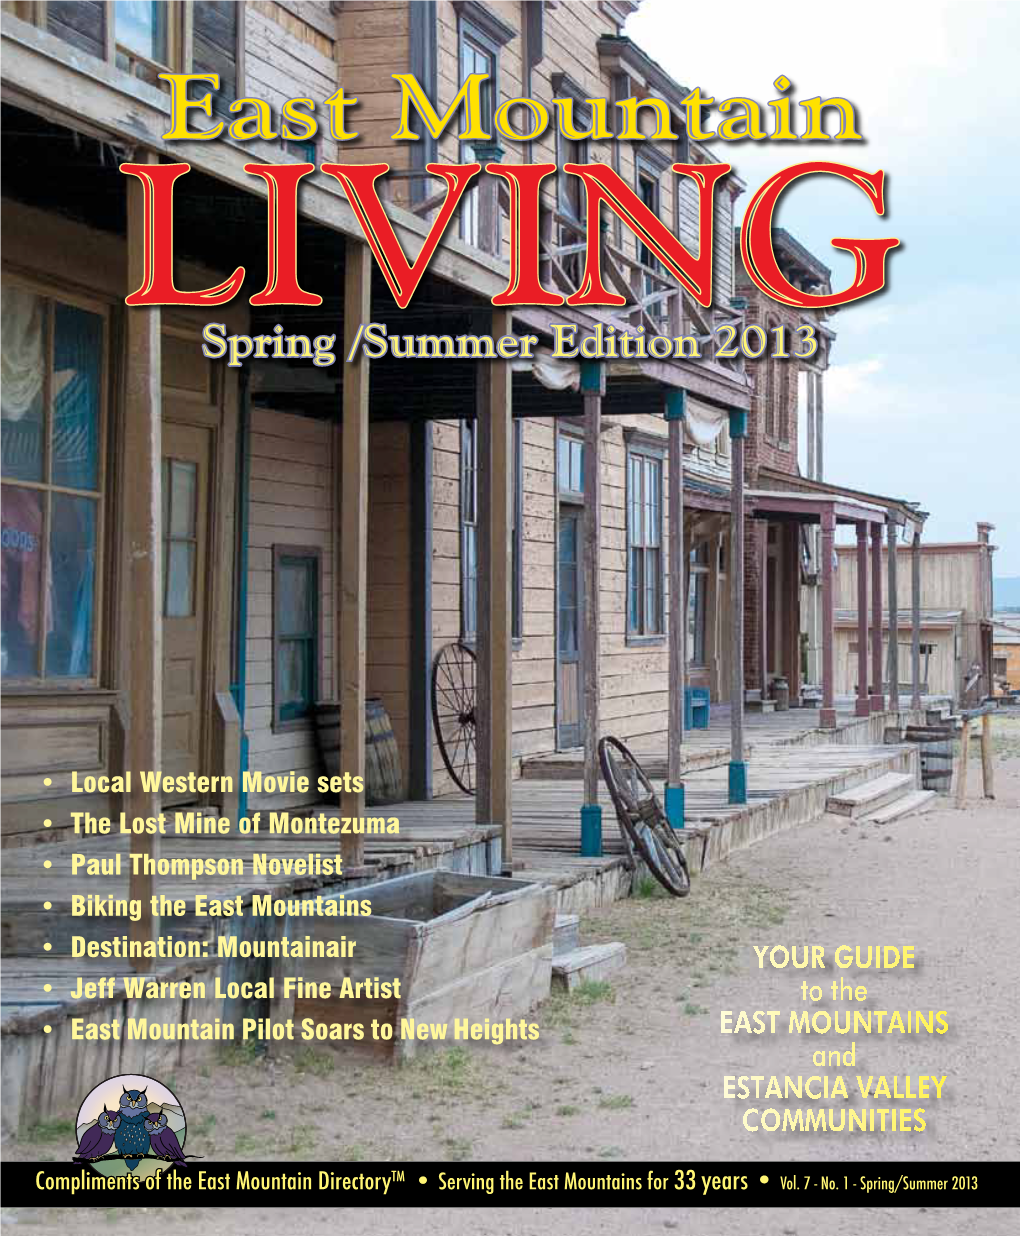 East Mountain LIVING Spring /Summer Edition 2013